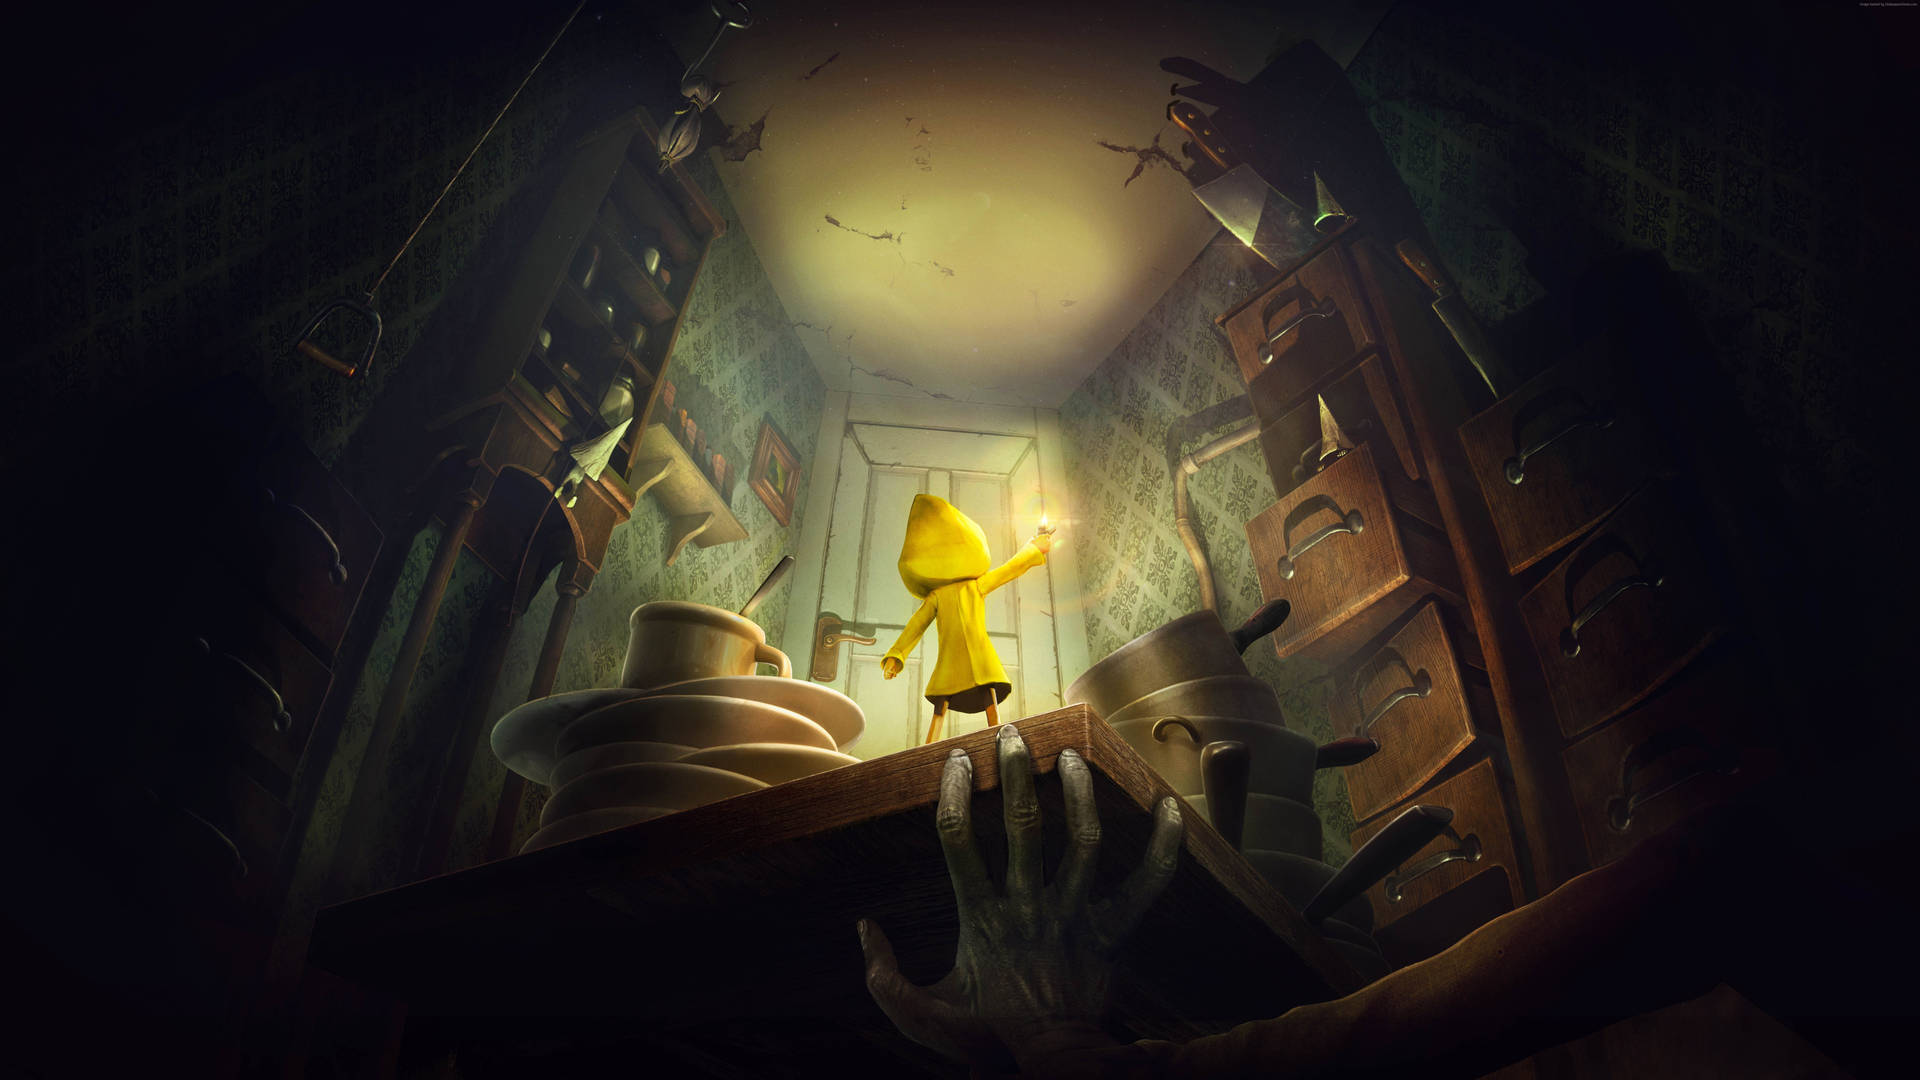 Top 999+ Little Nightmares Wallpapers Full HD, 4K✅Free to Use